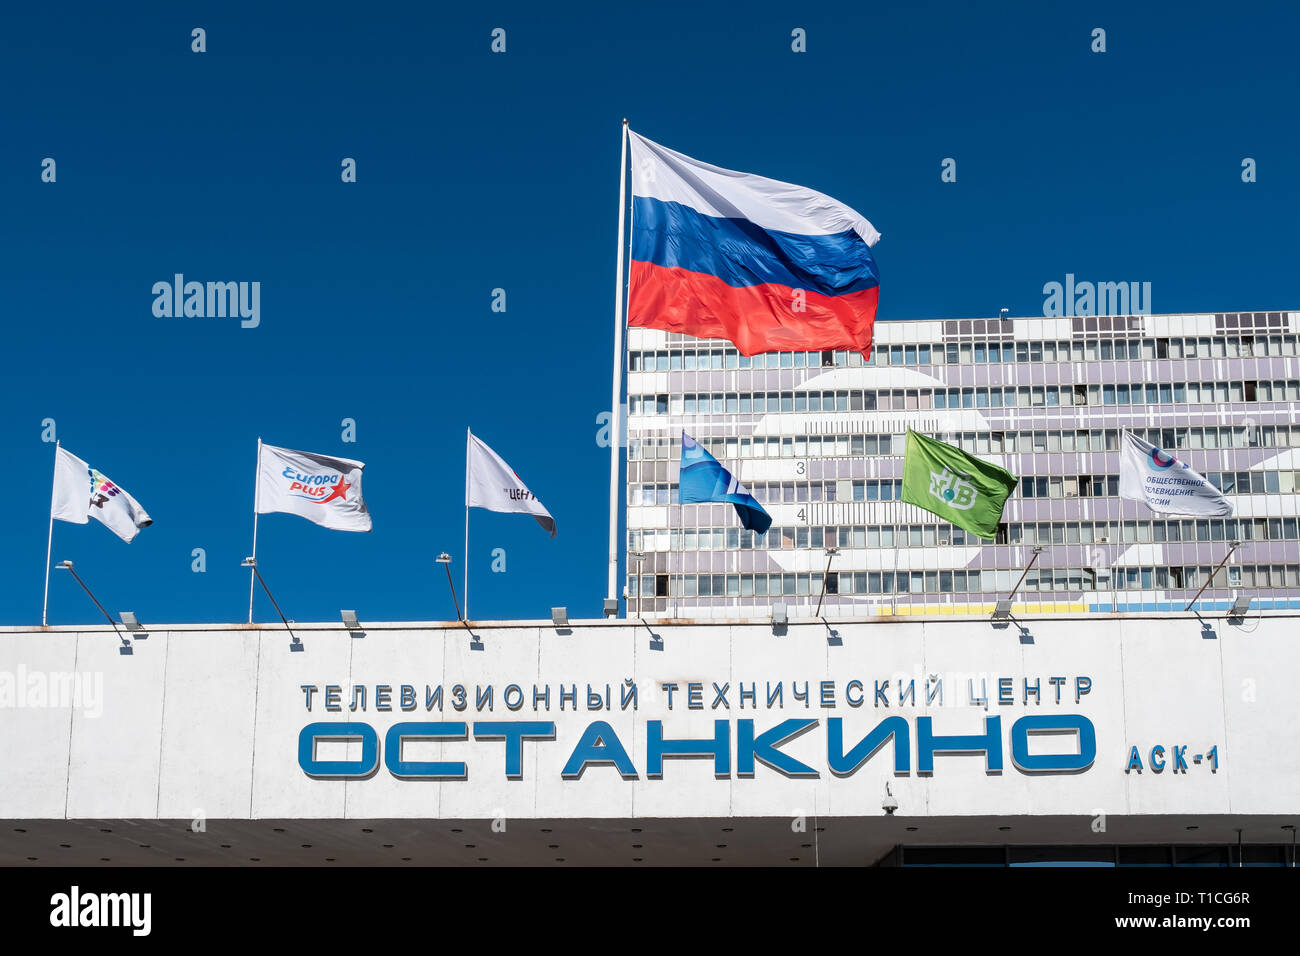 MOSCOW - 12 October 2018: Television studio and technical center 'Ostankino' in Moscow. Stock Photo